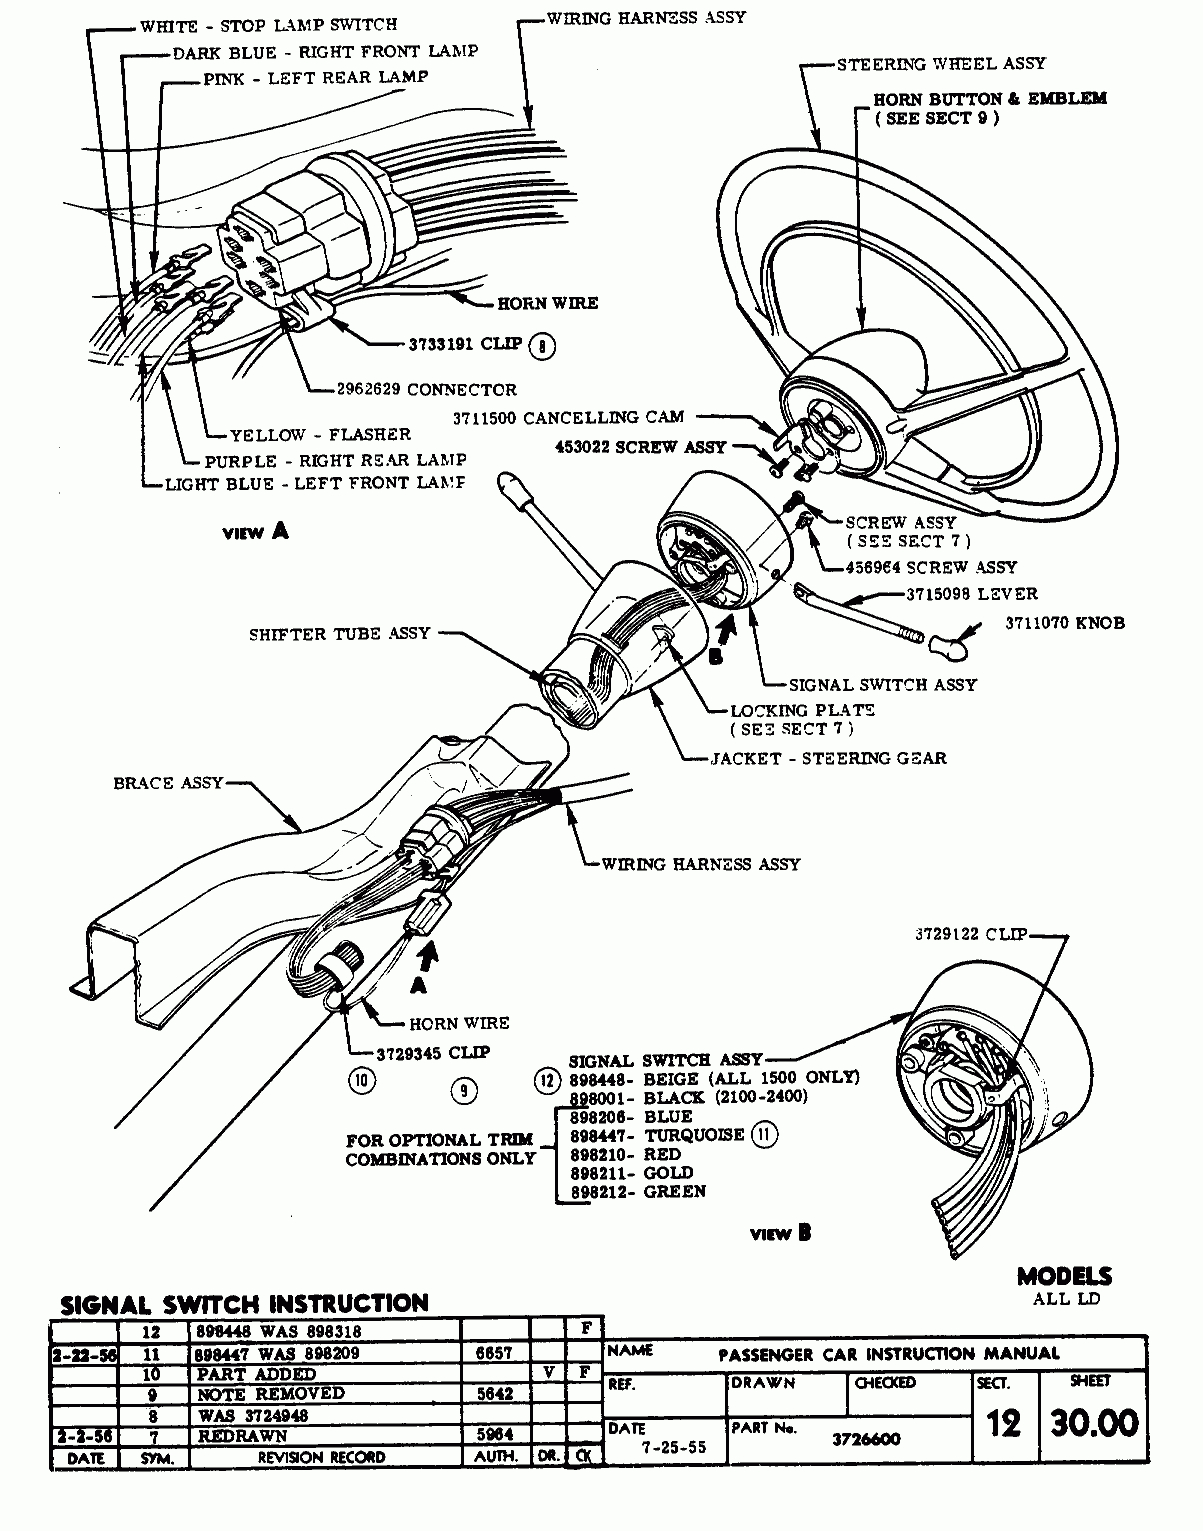 Chevy Ignition Switch Wiring Help Hot Rod Forum Hotrodders Ididit - Ignition Switch Wiring Diagram Chevy